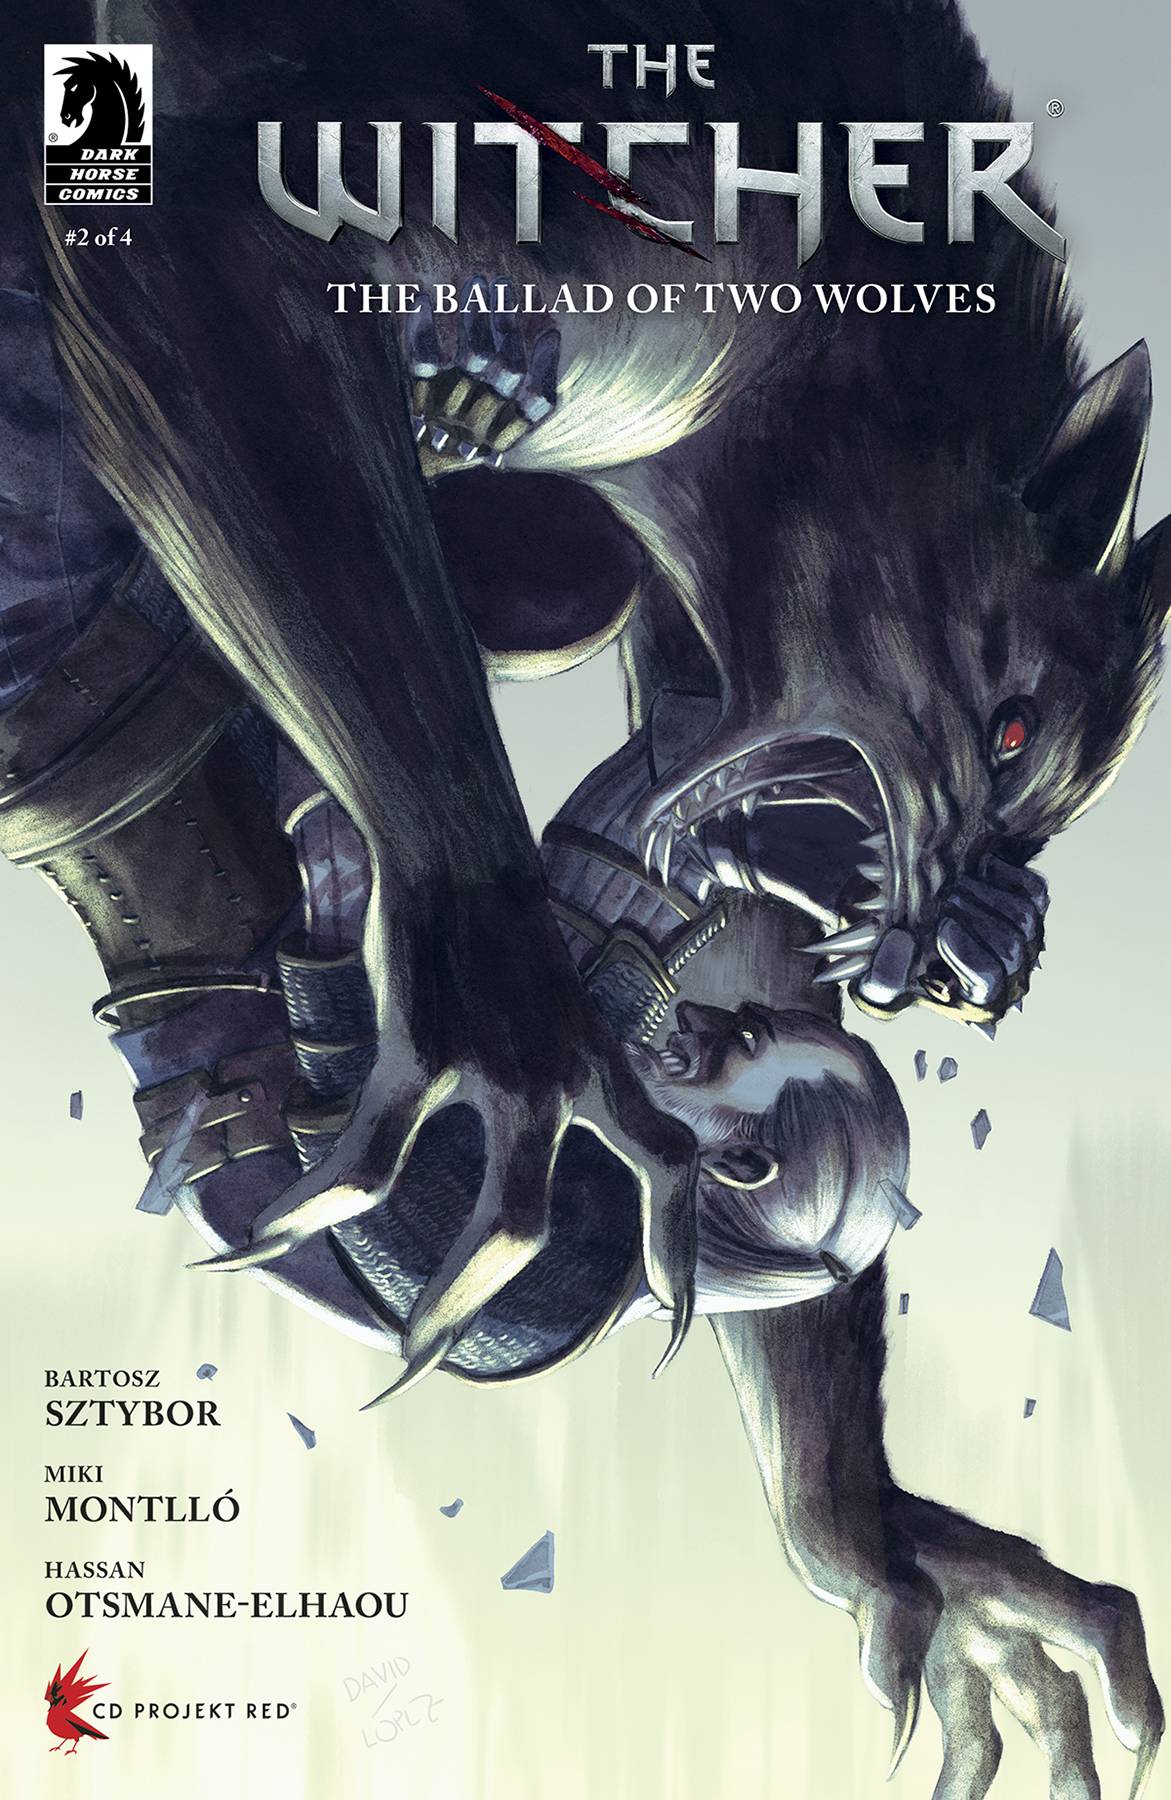 WITCHER THE BALLAD OF TWO WOLVES #2 (OF 4) CVR D LOPEZ - Third Eye